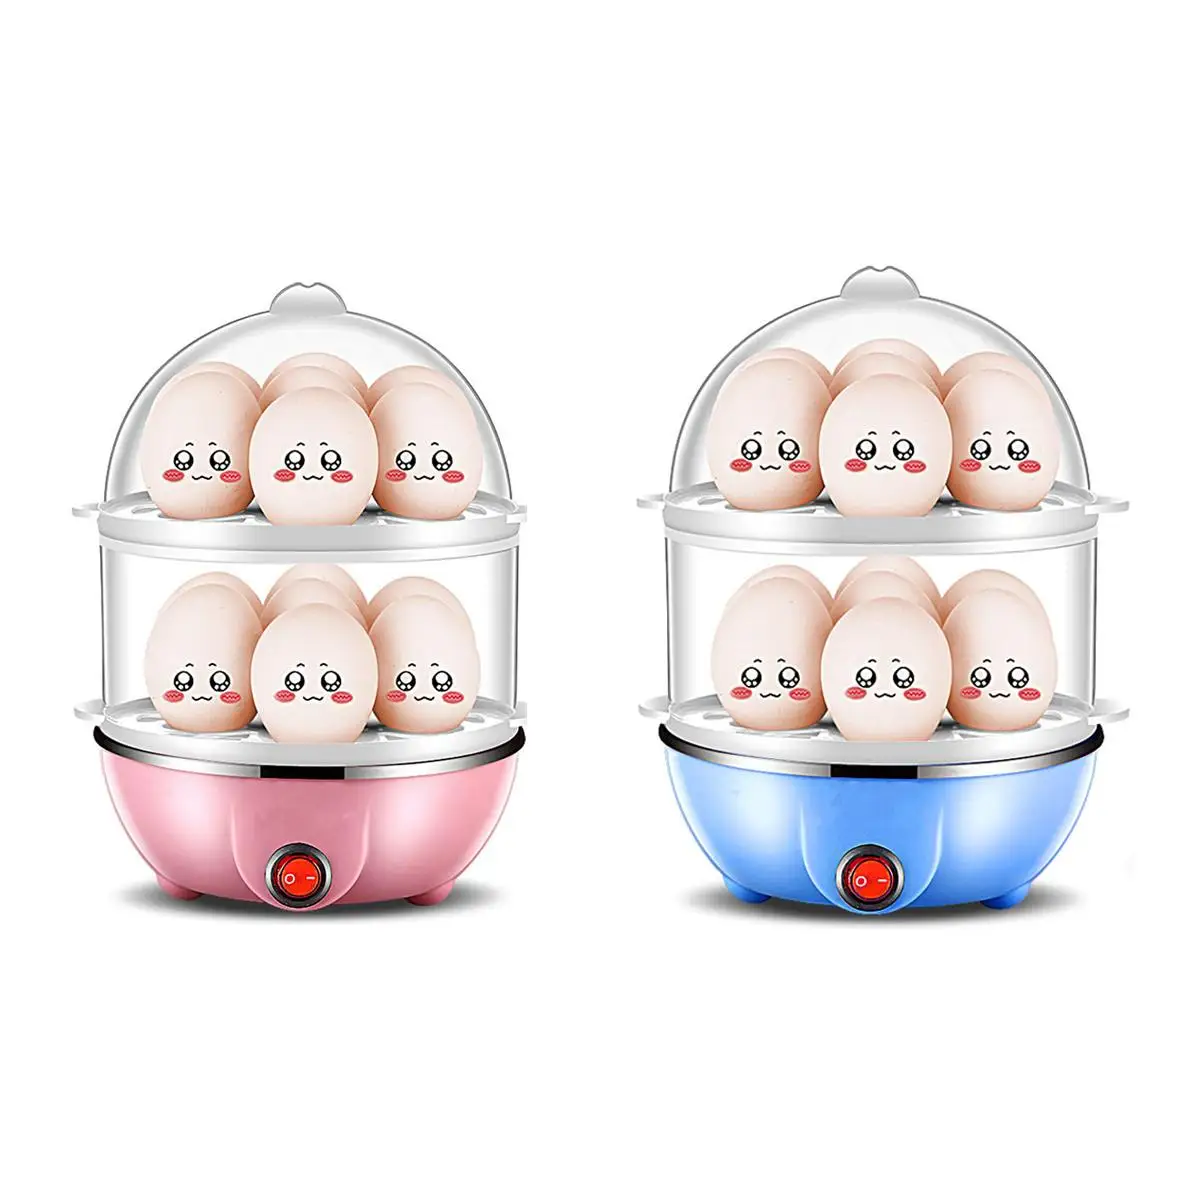 Egg Cooker,350W Double-Layer Electric Egg Maker Multi-functional Eggs Boiler Steamer with 14 Eggs Capacity Pink 